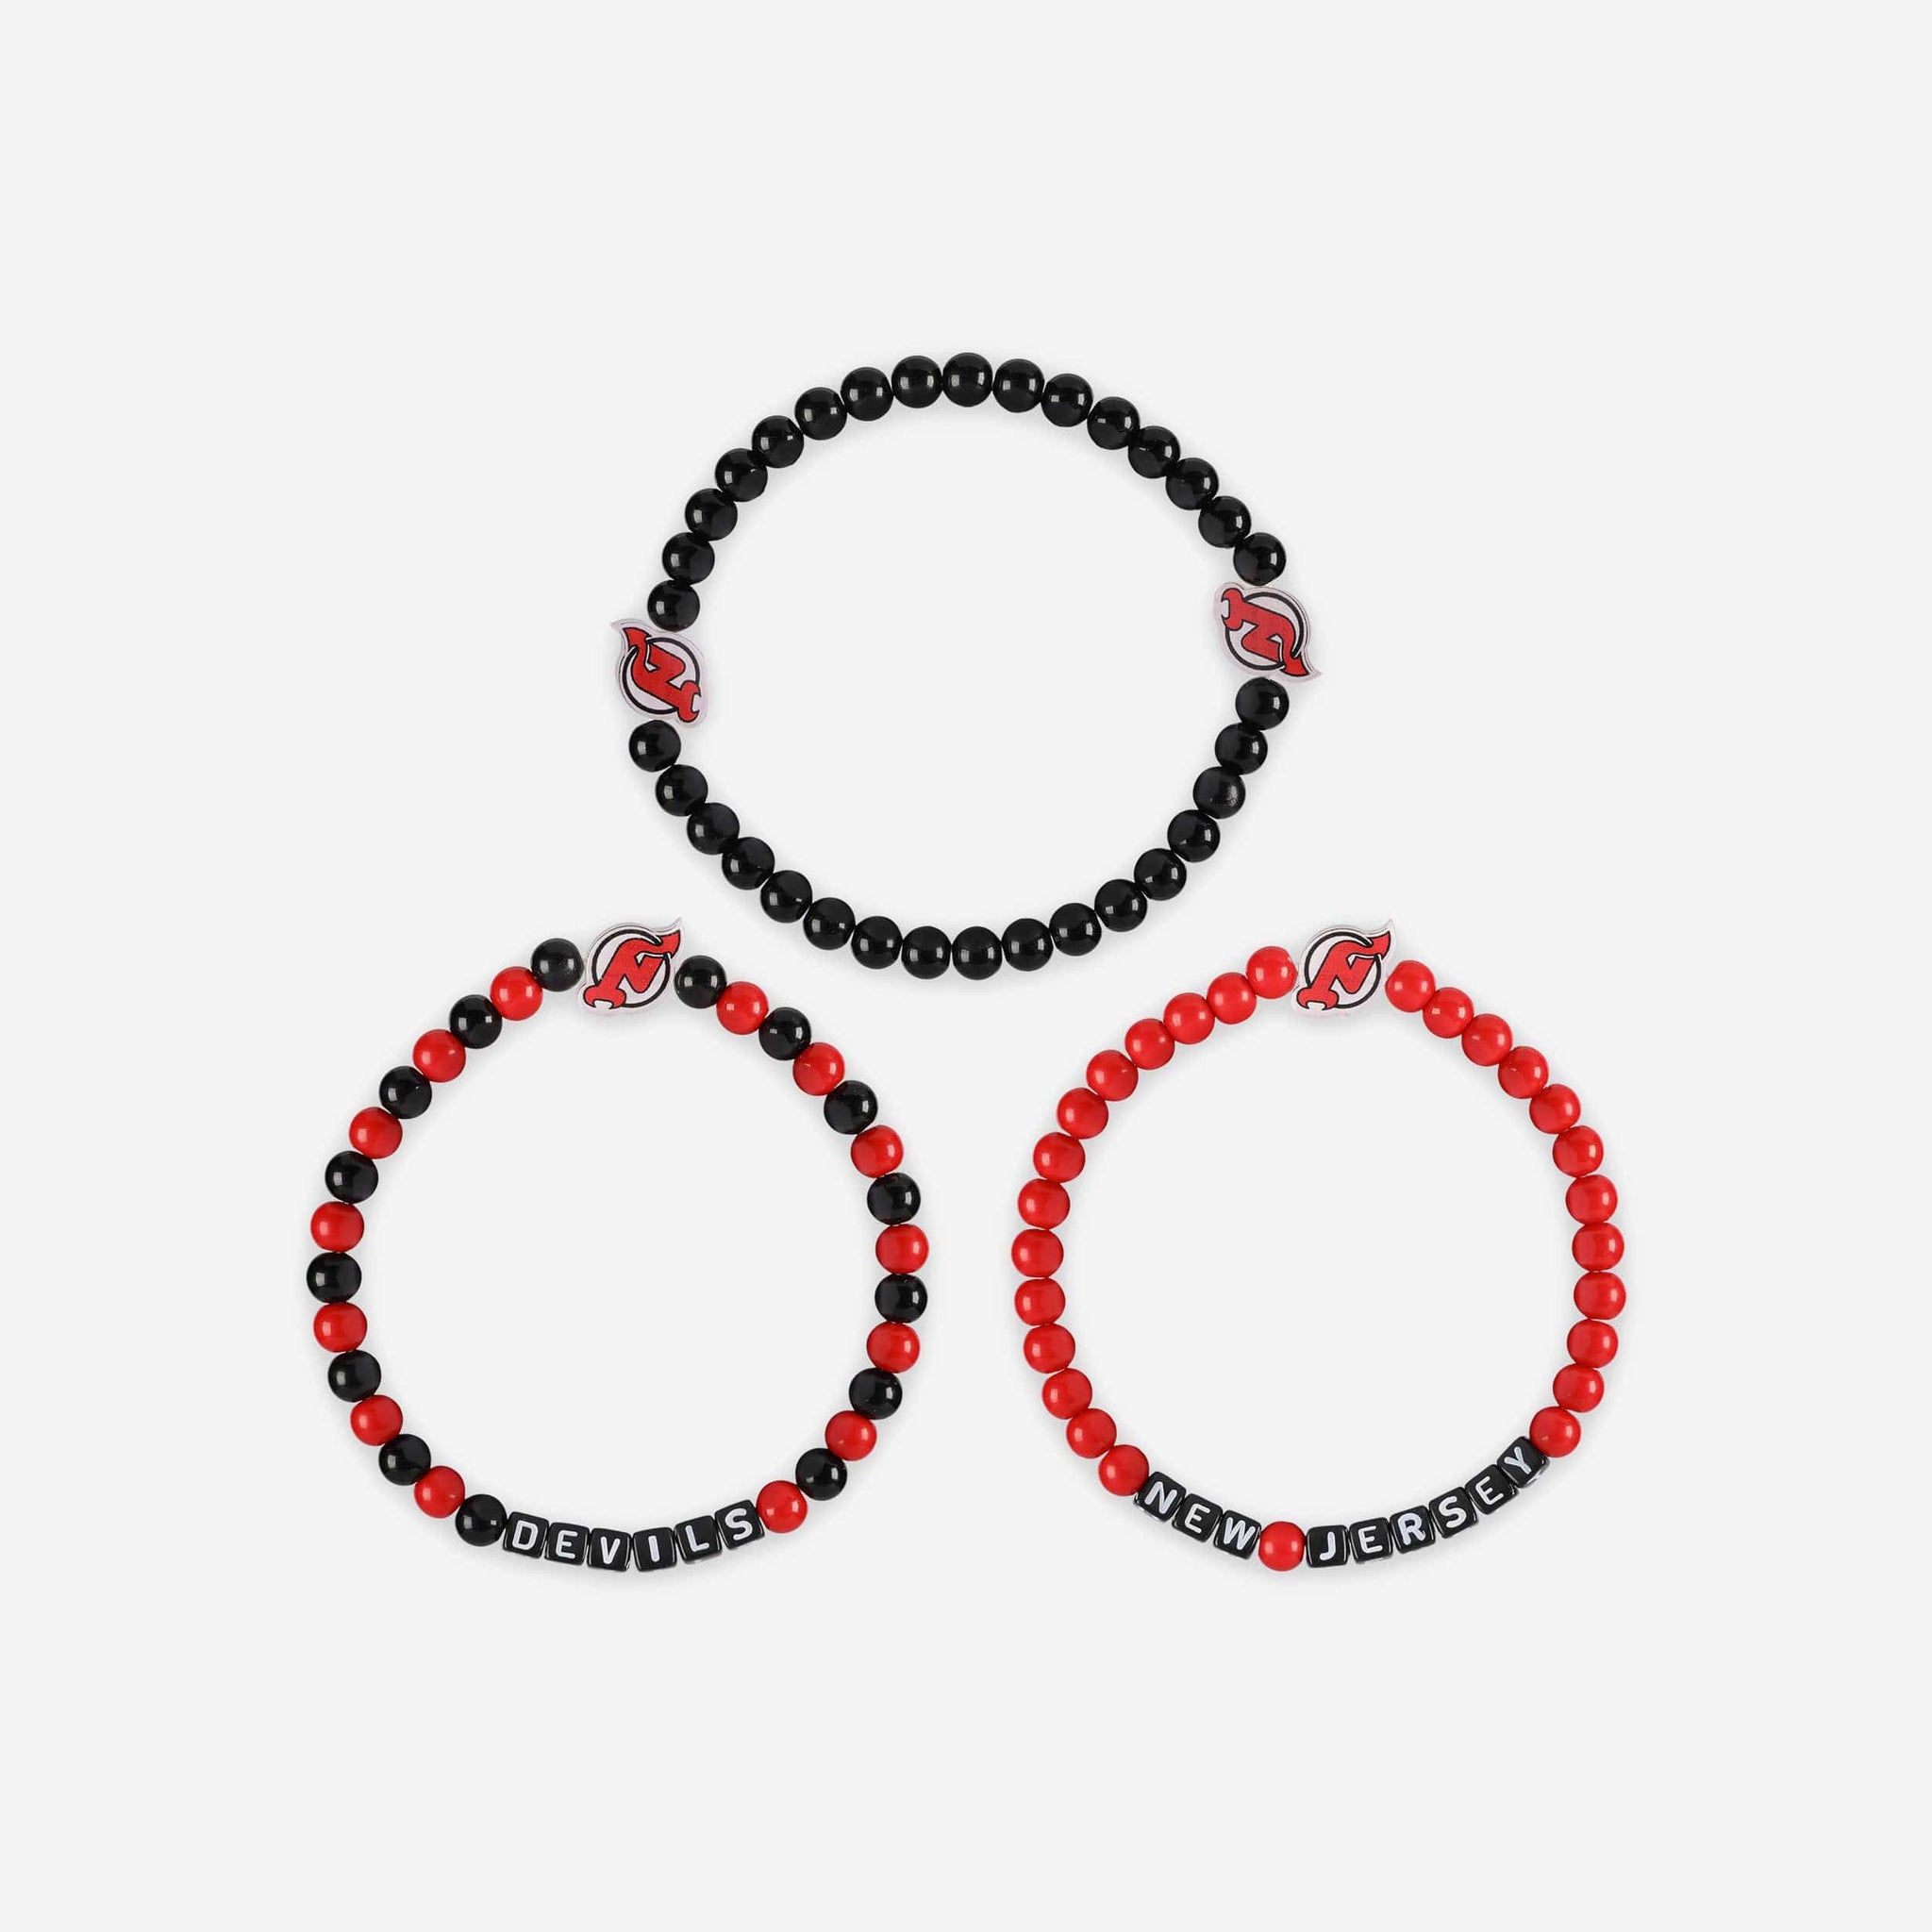 The Most Popular Types Of Bracelets & Buying Guide